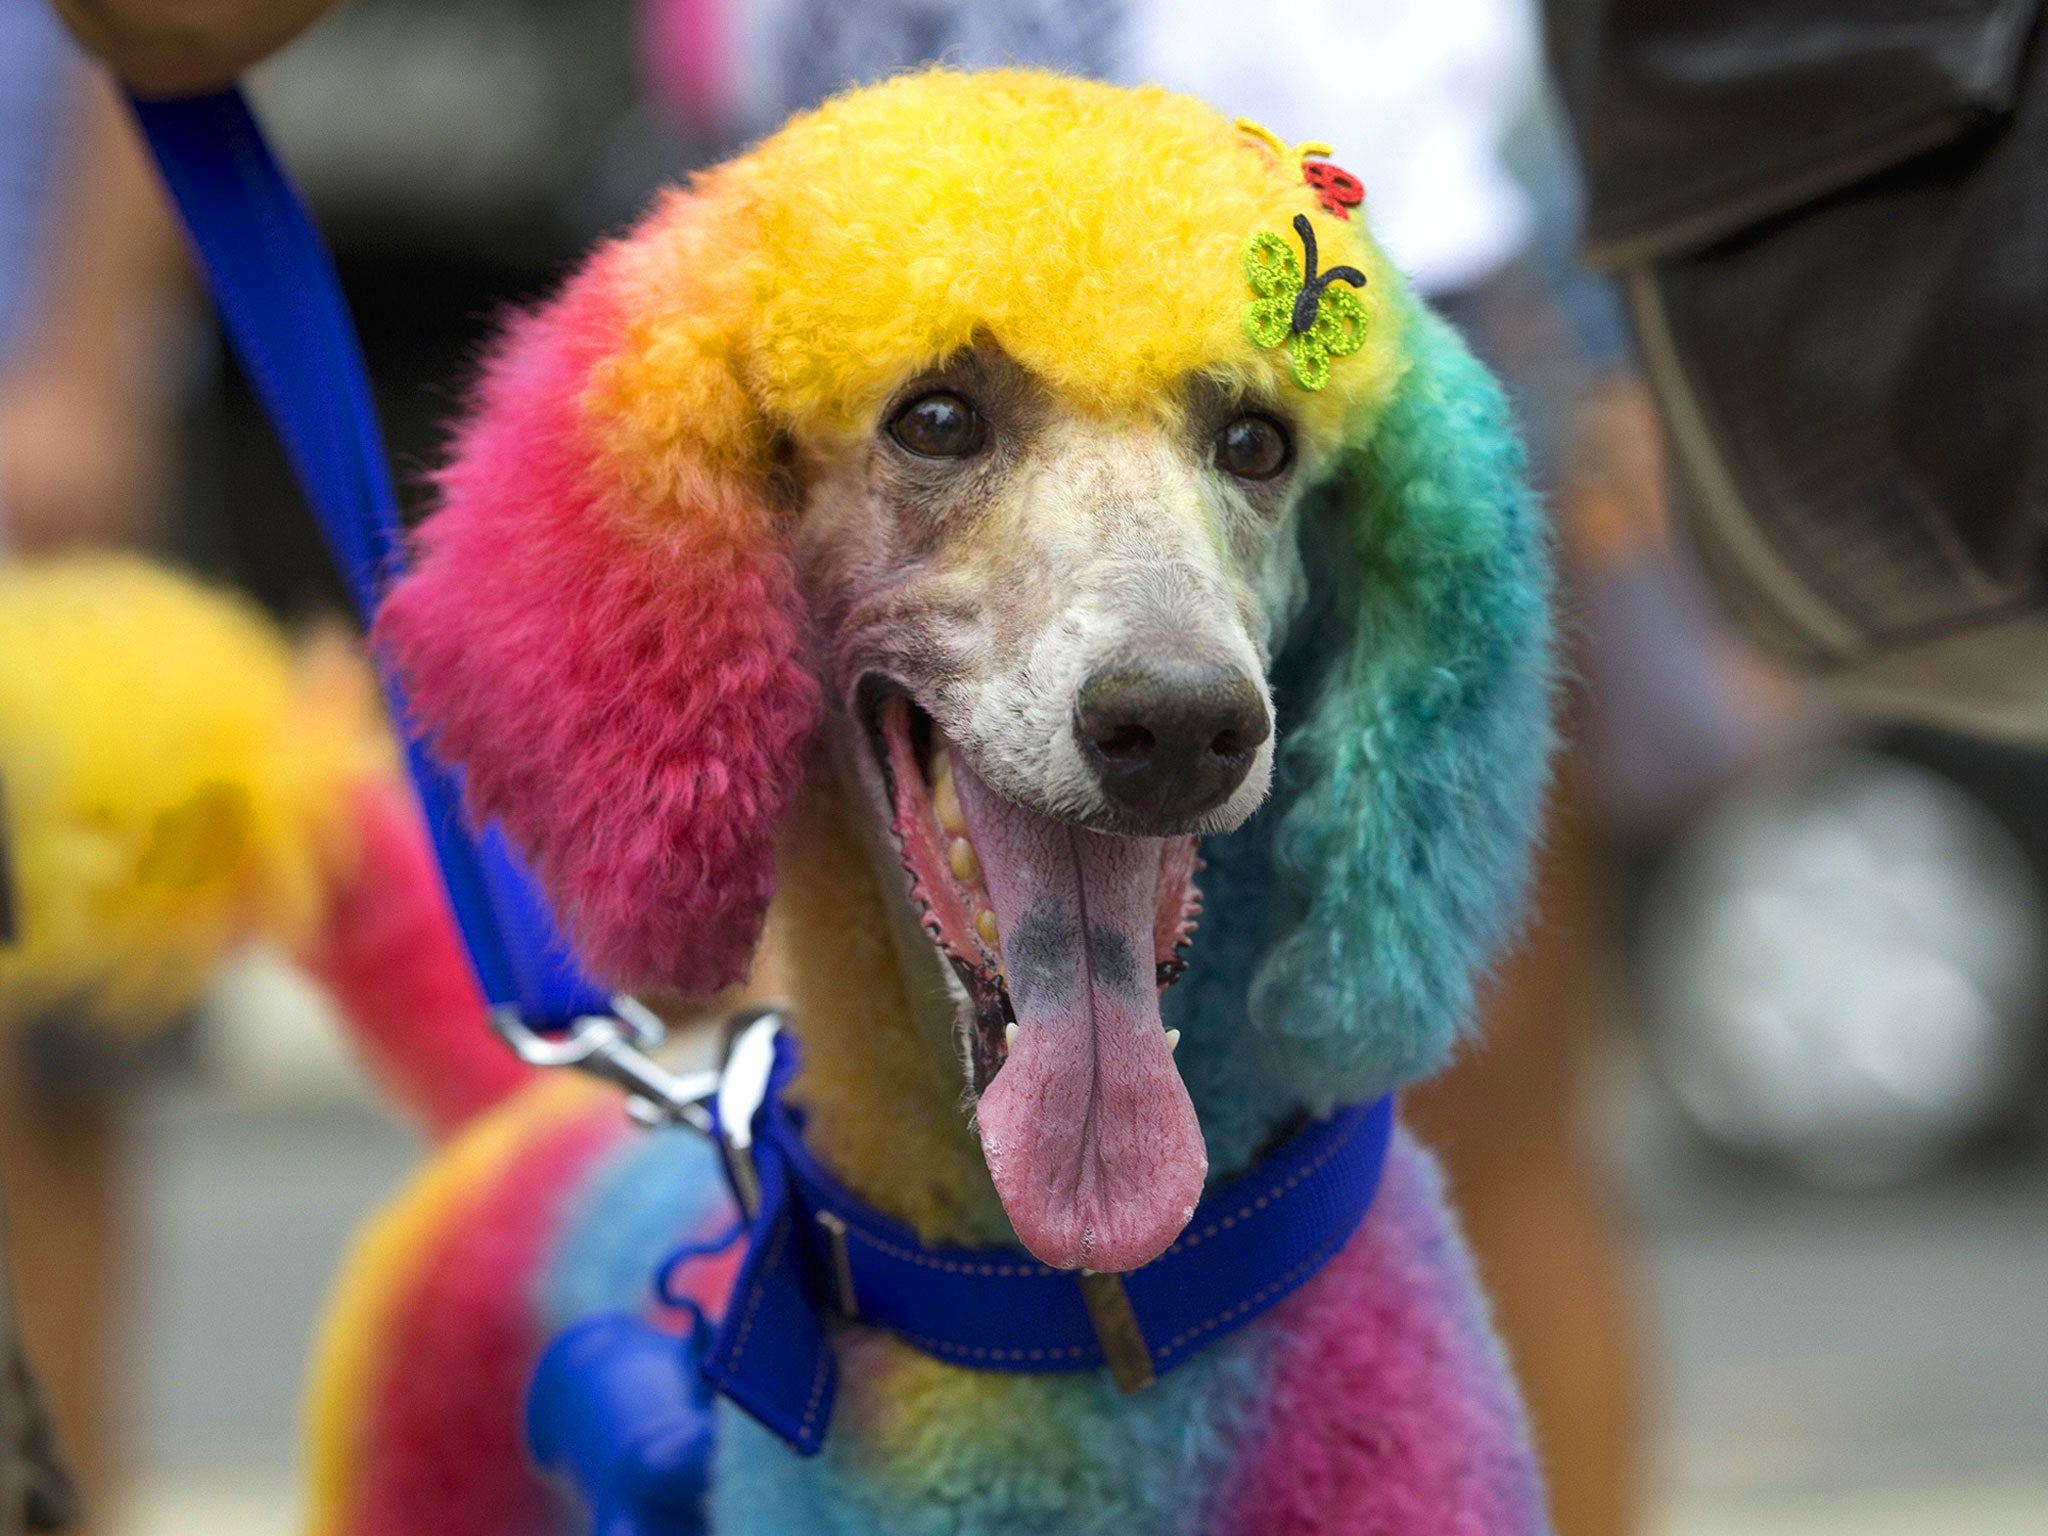 A multicolored painted poodle is seen during the "Blocao" dog carnival in Rio de Janeiro